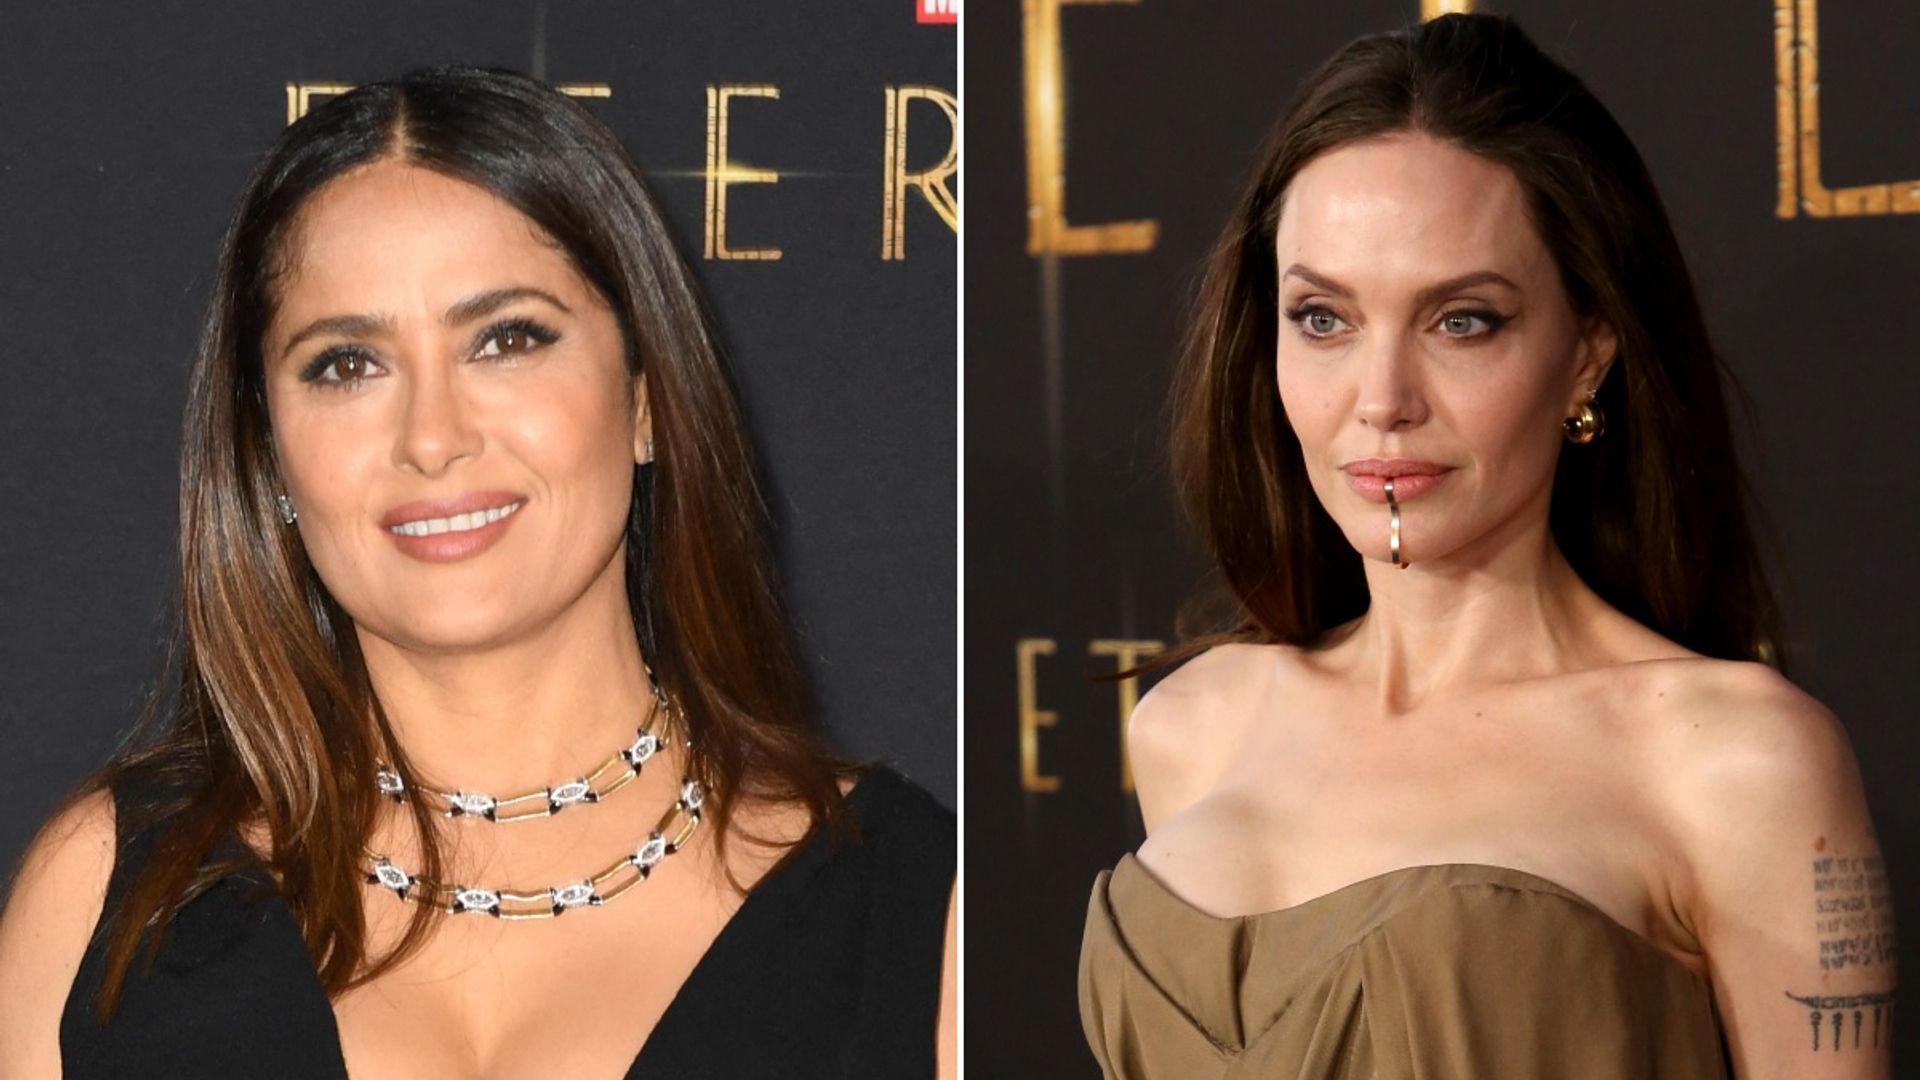 Angelina Jolie and Salma Hayek cancel appearances after COVID-19 exposure